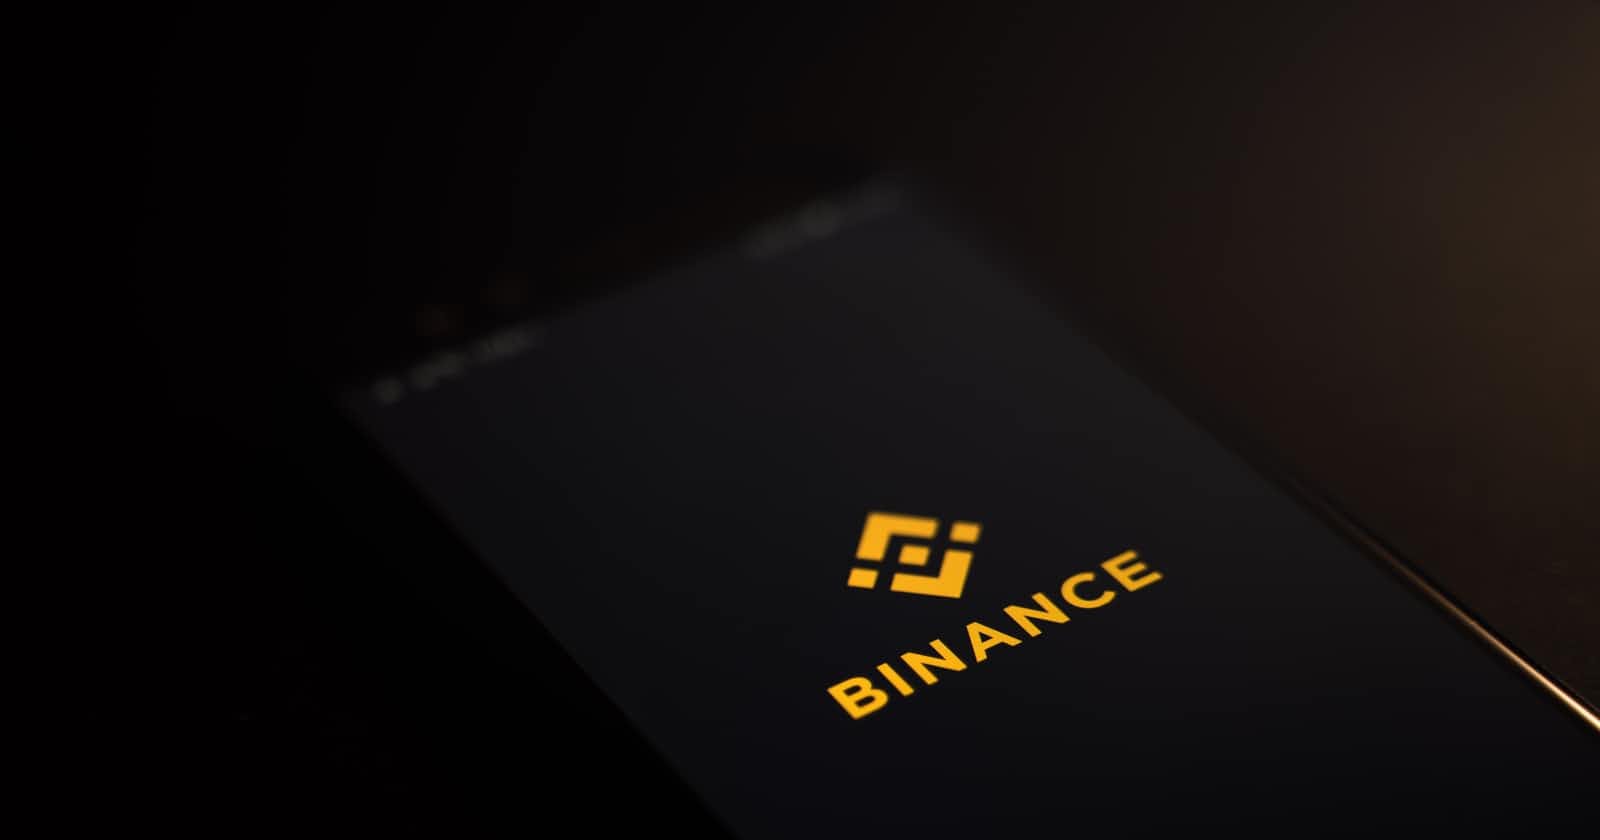 How to Trade Coins on Binance: Step by Step Guide.